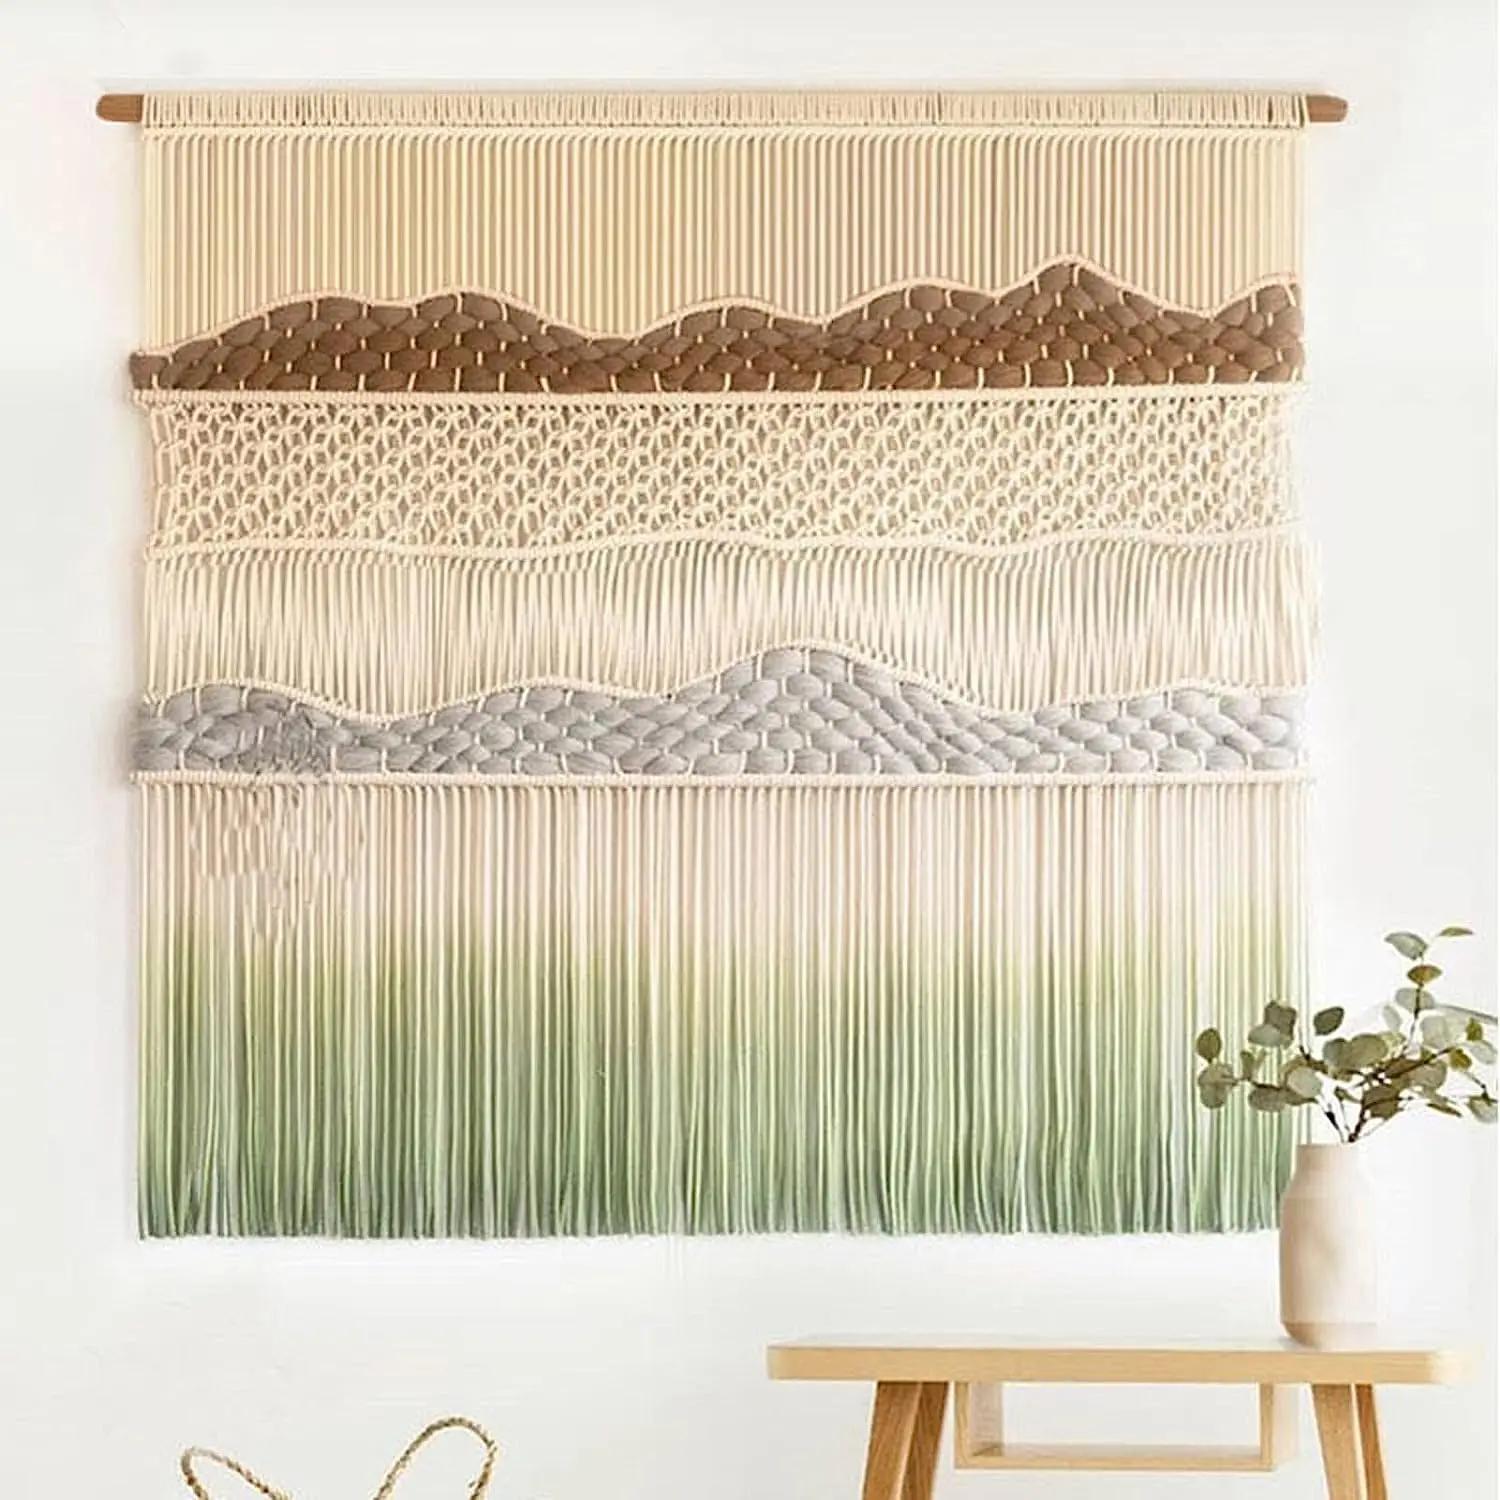 Woven Large Macrame Wall Hanging Handmade Homeware Products Tapestry ...